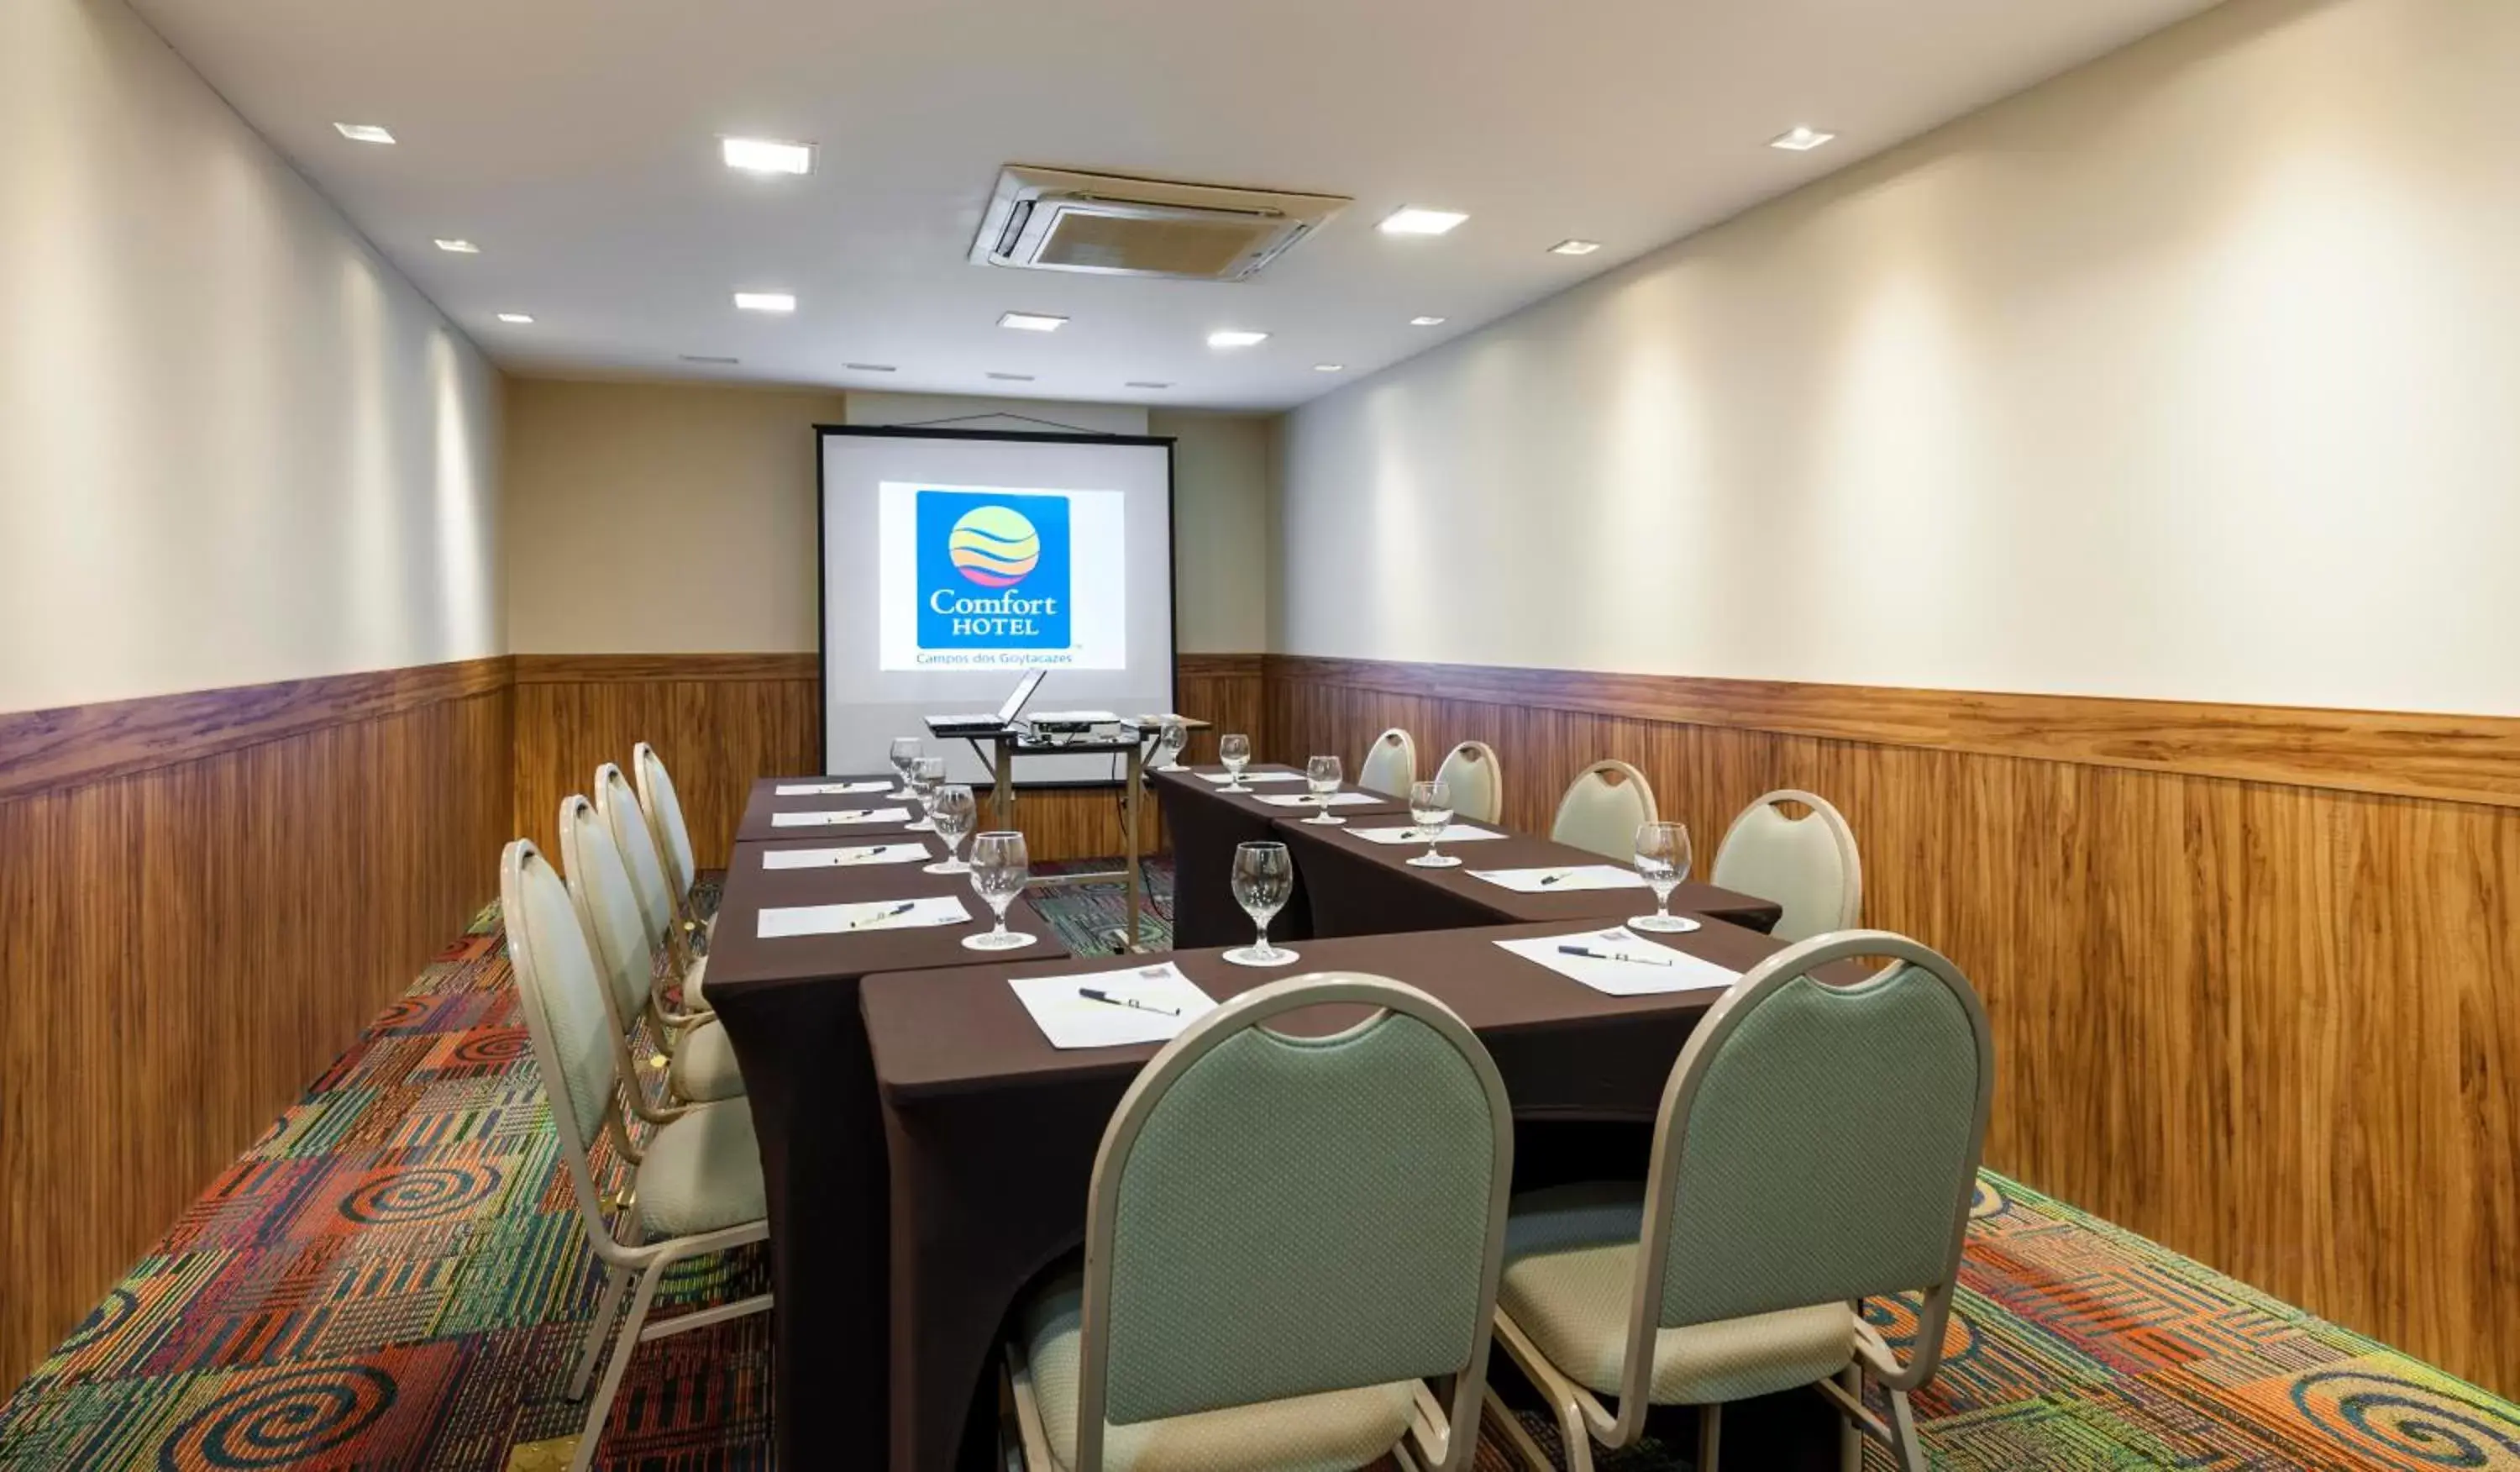 Meeting/conference room in Comfort Hotel Campos dos Goytacazes